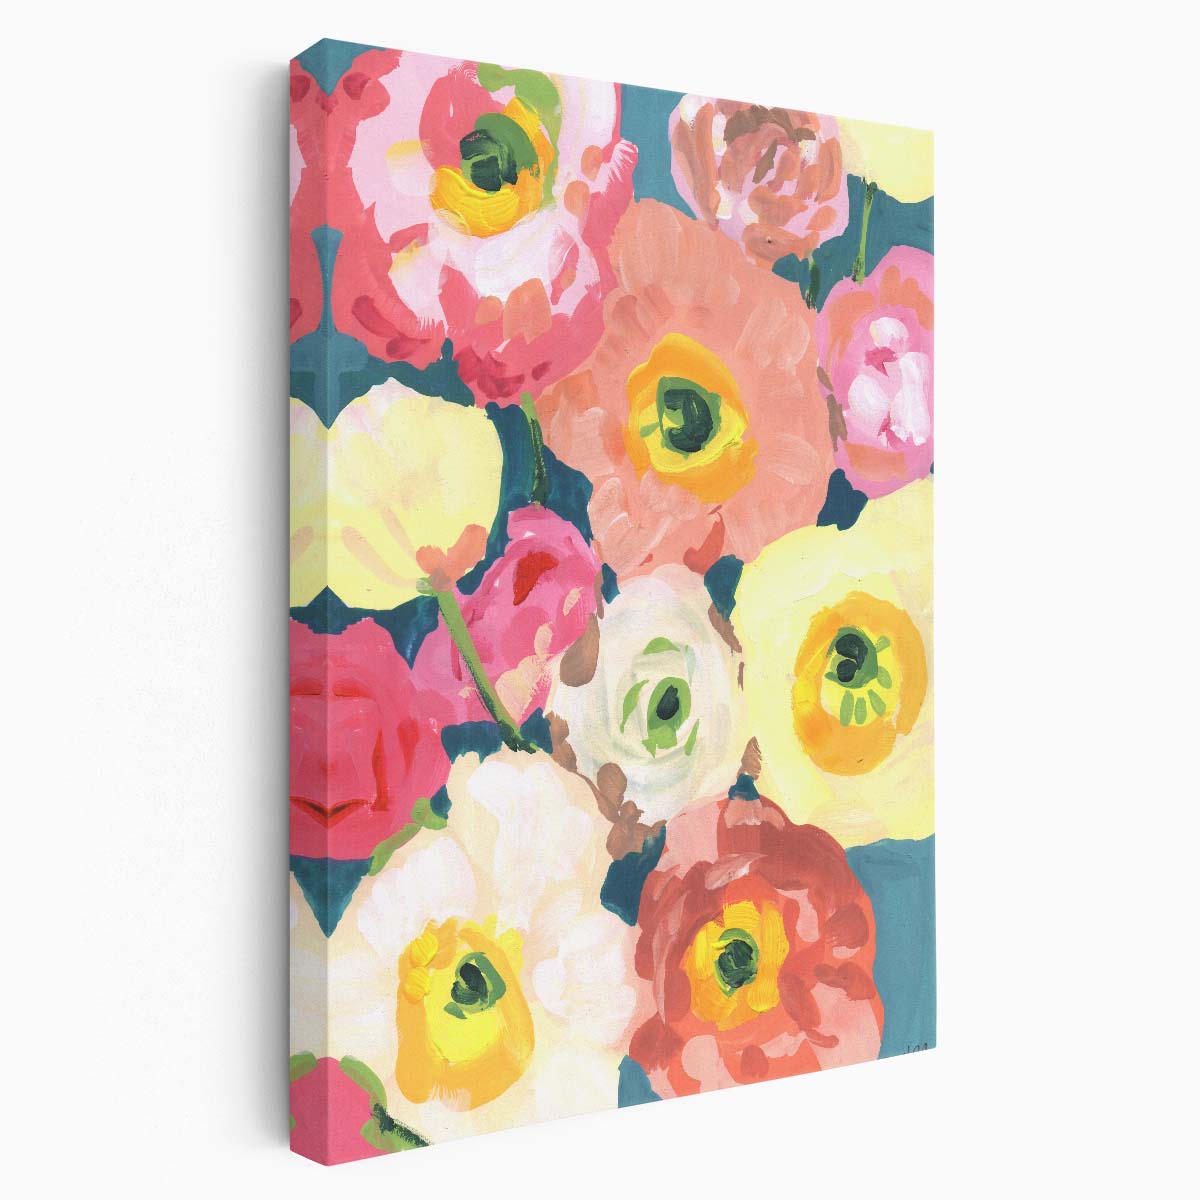 Colorful Botanical Icelandic Poppies Illustration; Bold Floral Artwork by Luxuriance Designs, made in USA